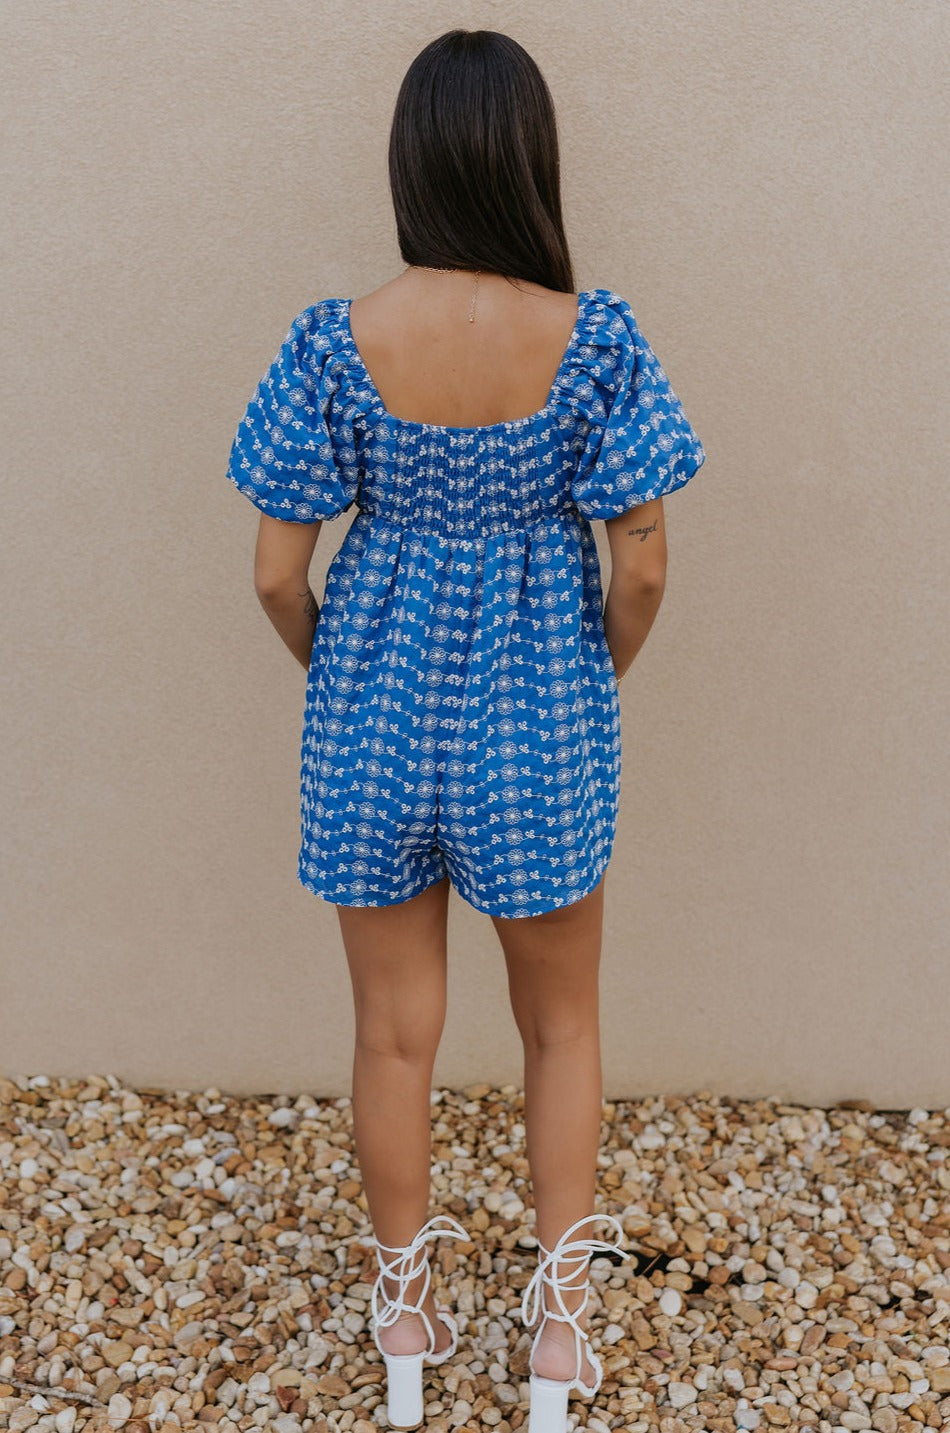 Full body back view of model wearing the Marissa Blue and White Floral Short Sleeve Romper which features Blue Lightweight Fabric, White Floral Design, Blue Lining, Square Neckline, Short Puff Sleeves and Smocked Back.